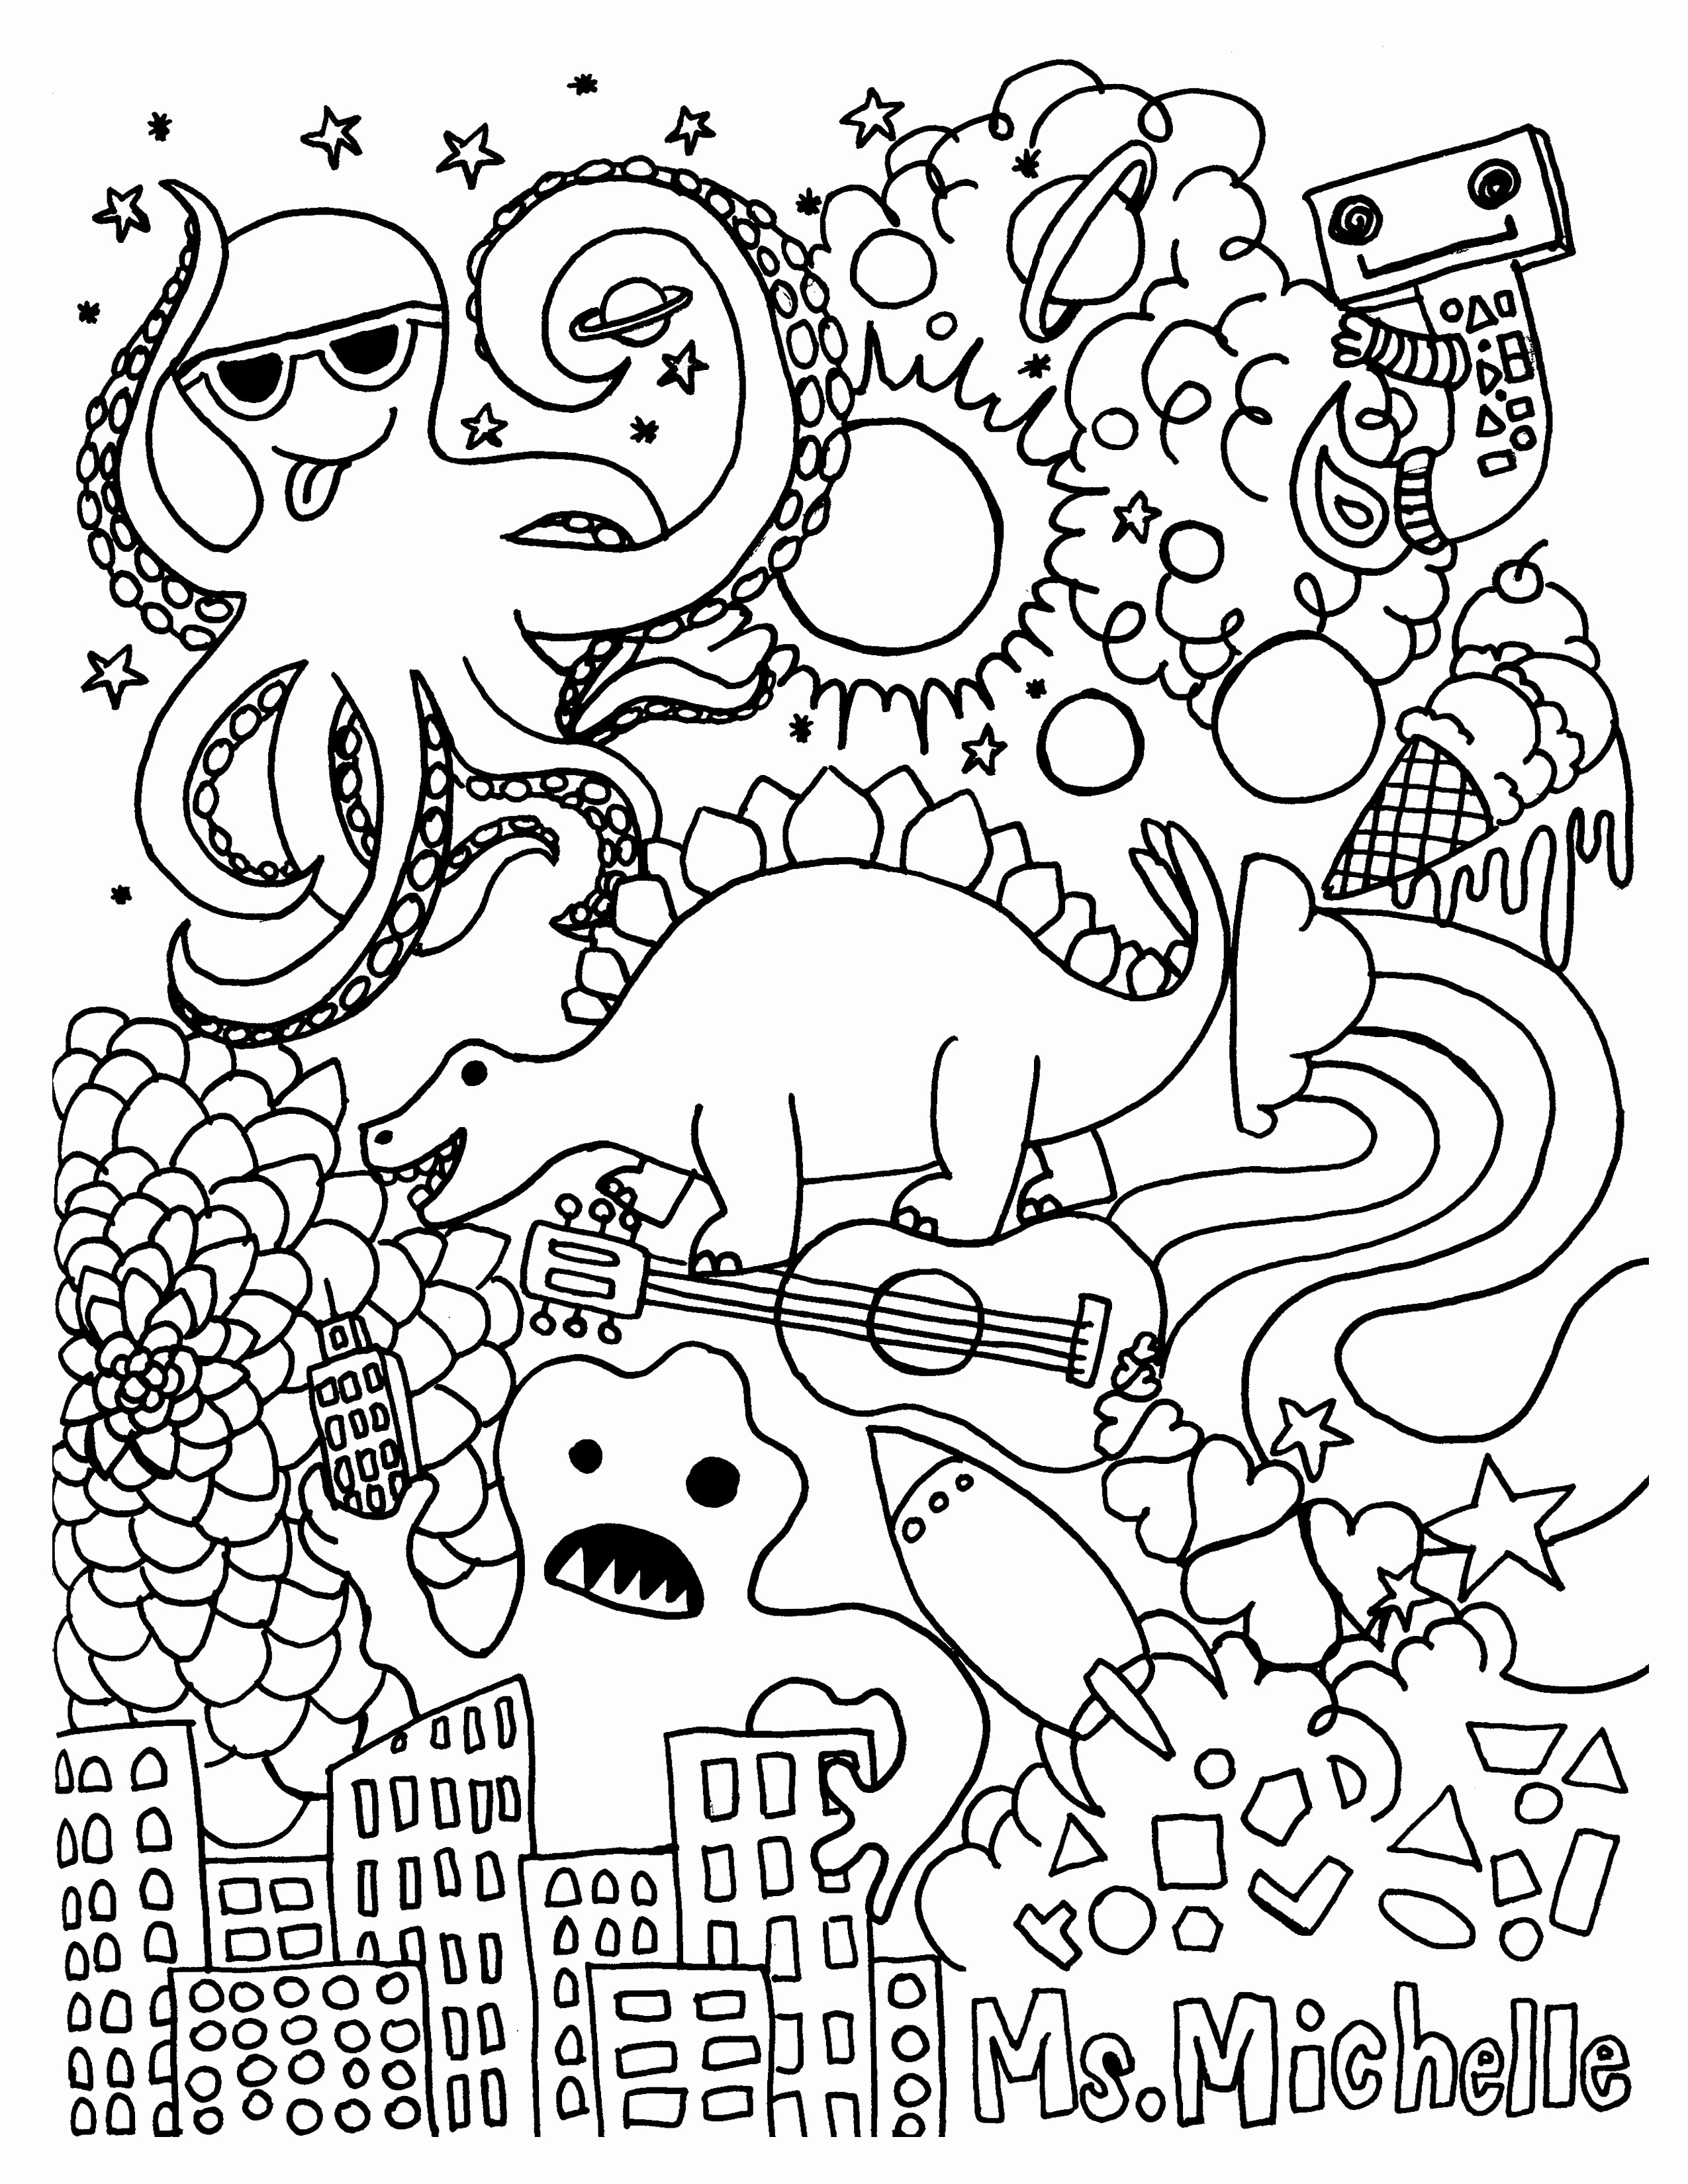 3rd Grade Coloring Pages at GetColorings.com | Free ...